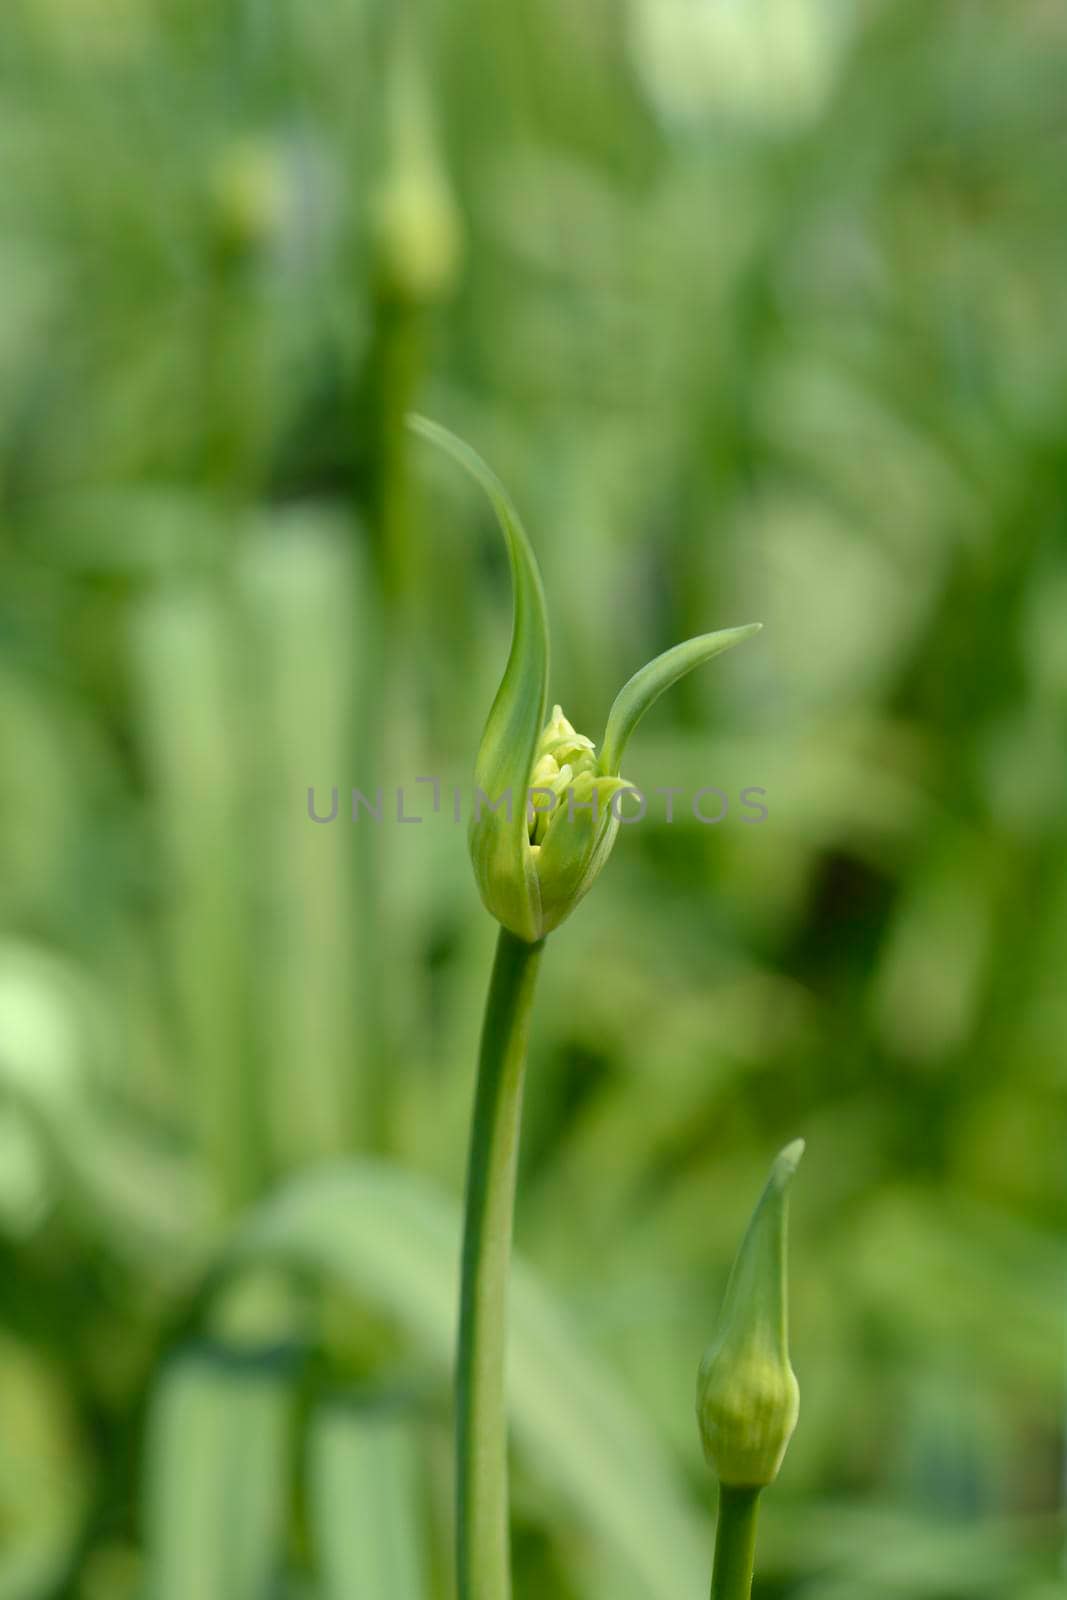 African Lily Amourette White flower buds - Latin name - Agapanthus Amourette White